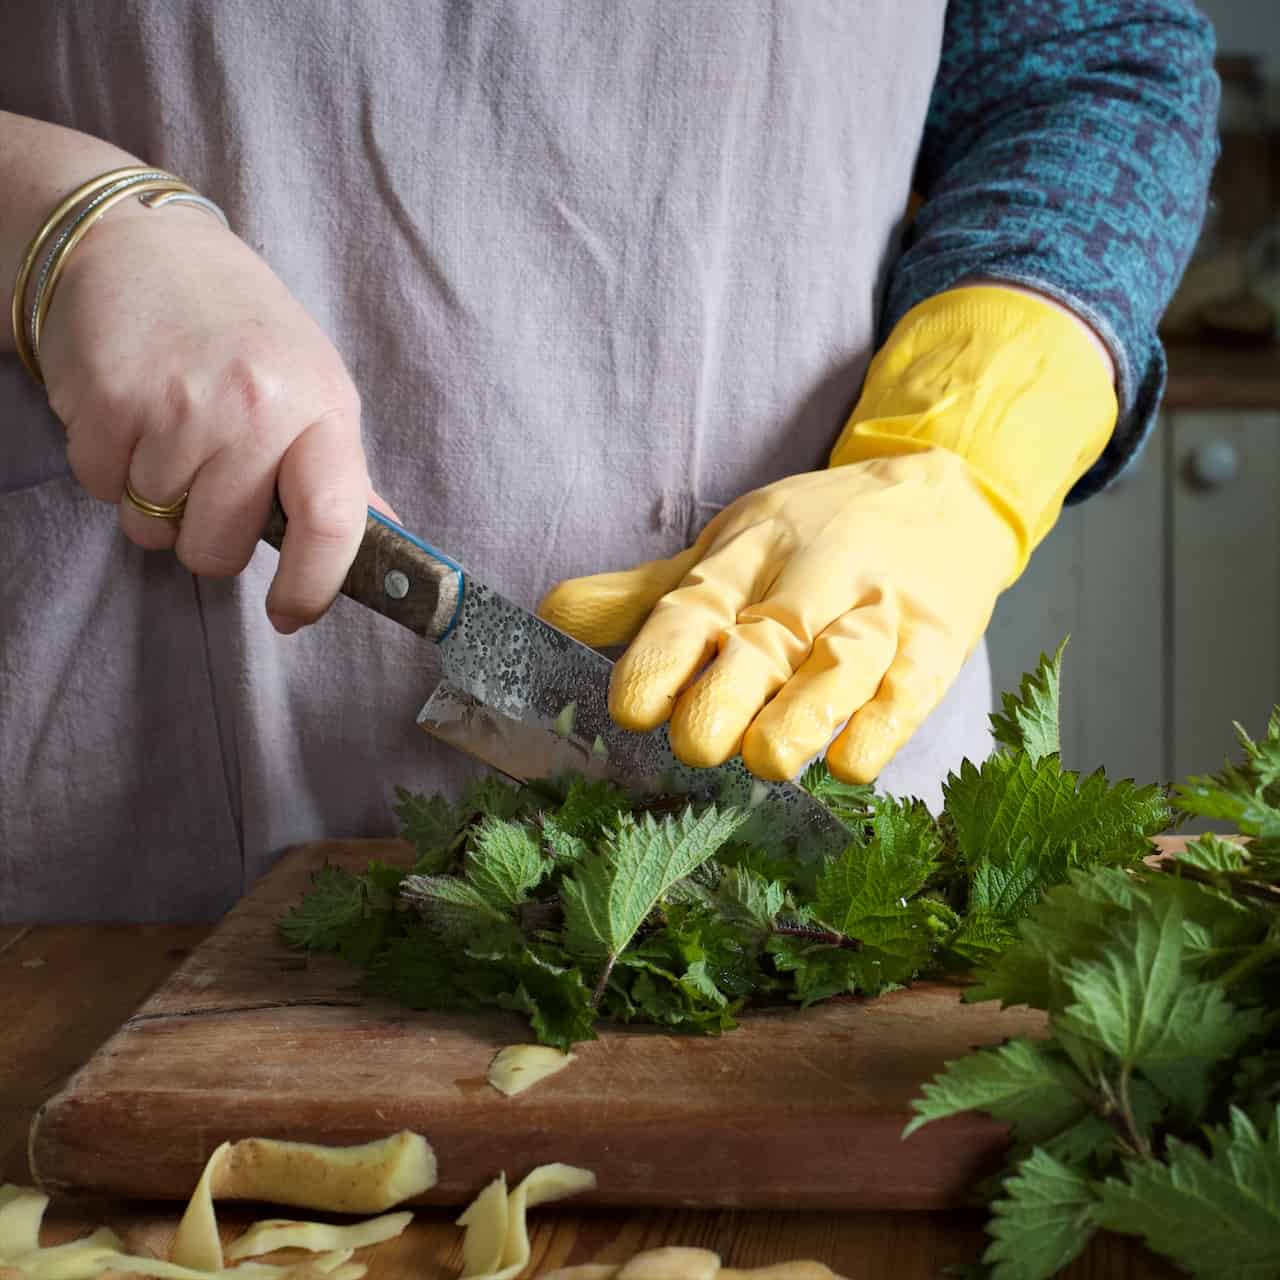 Woman wearing bright yellow rubber gloves chopping stinging nettles on a wooden chopping board